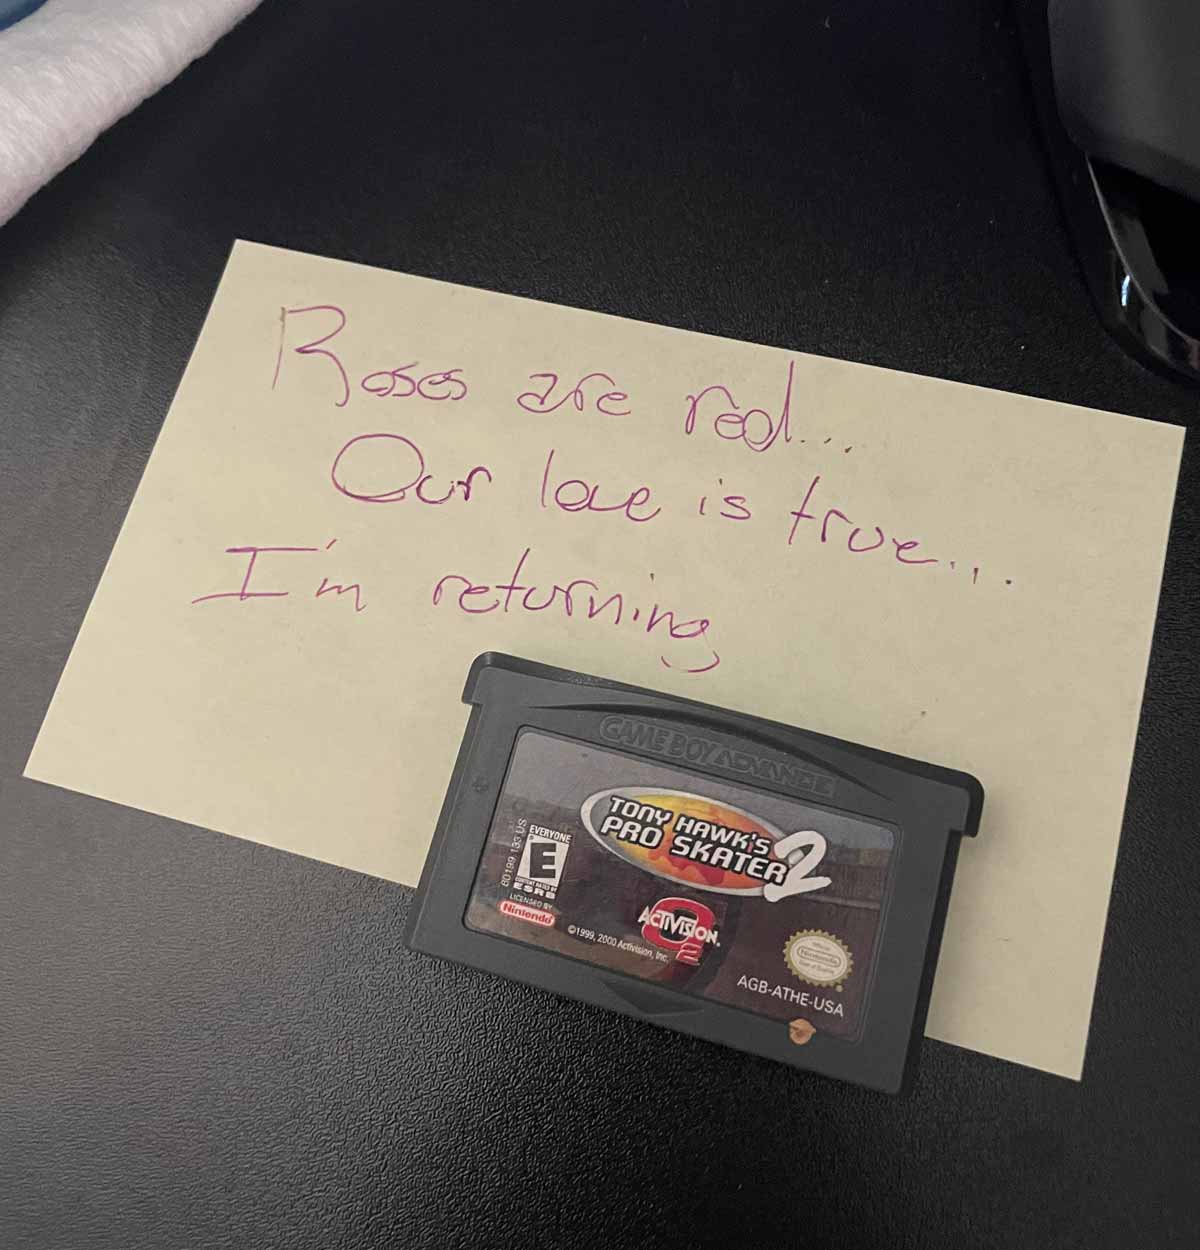 My fiancee left this on my desk for me to find